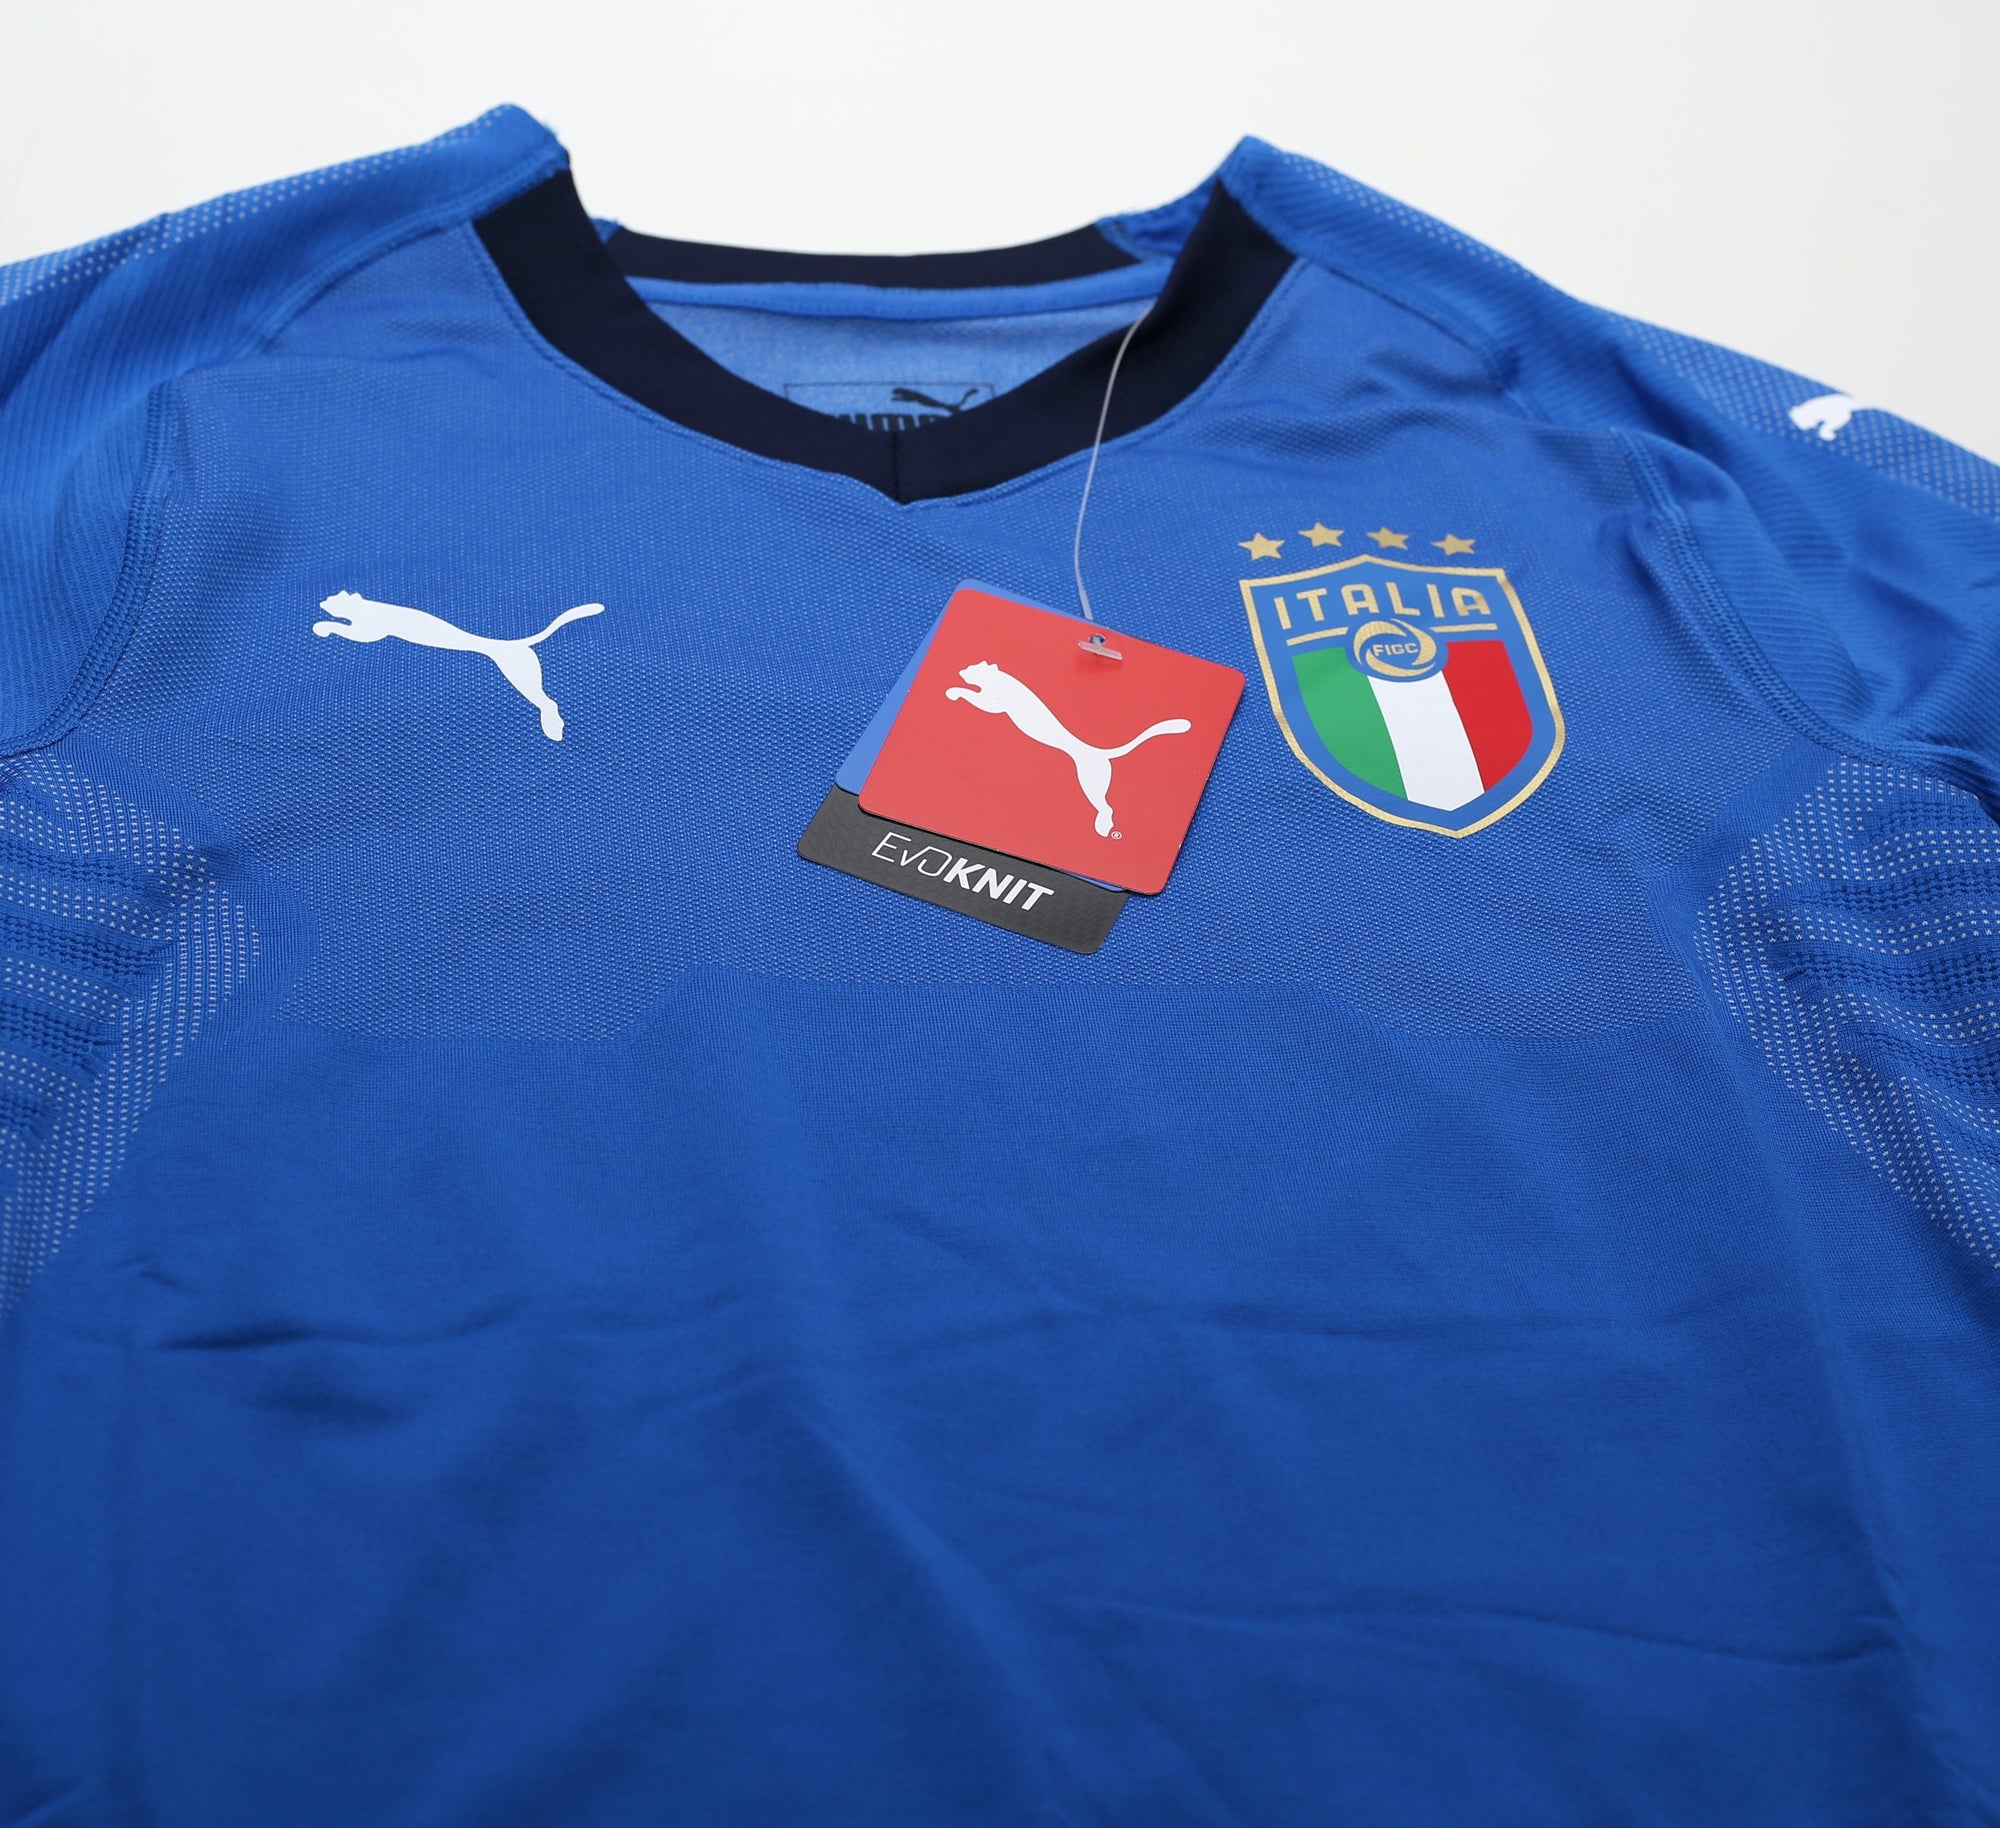 2017/18 ITALY PUMA Authentic Dry Cell Away Football Shirt (L) BNWT